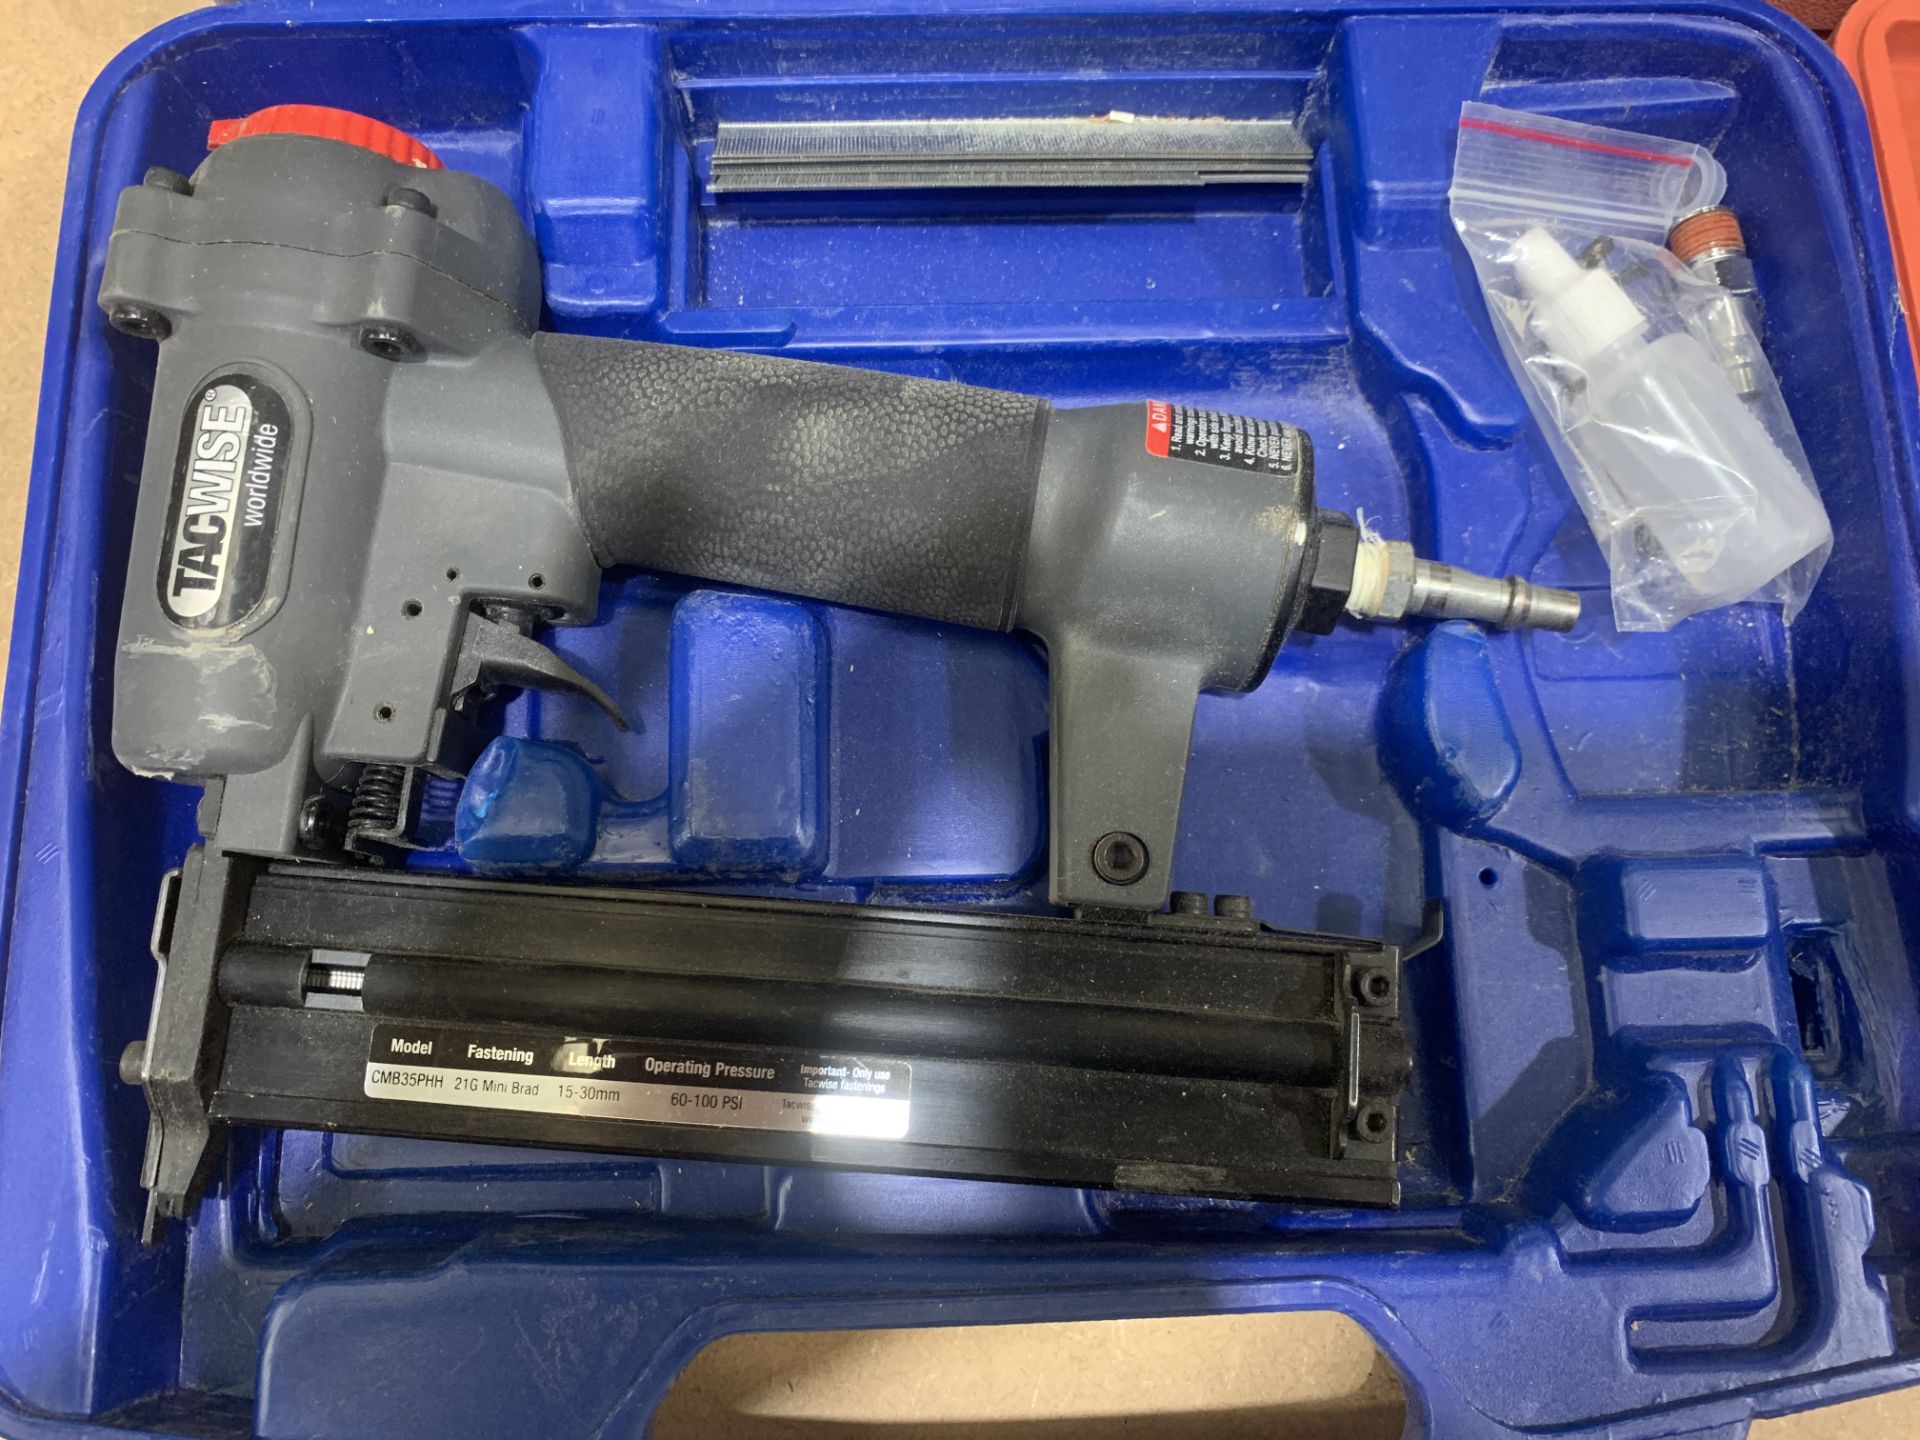 Tacwise C1832V, CMB35PHH air staplers and 1 other - Image 4 of 4